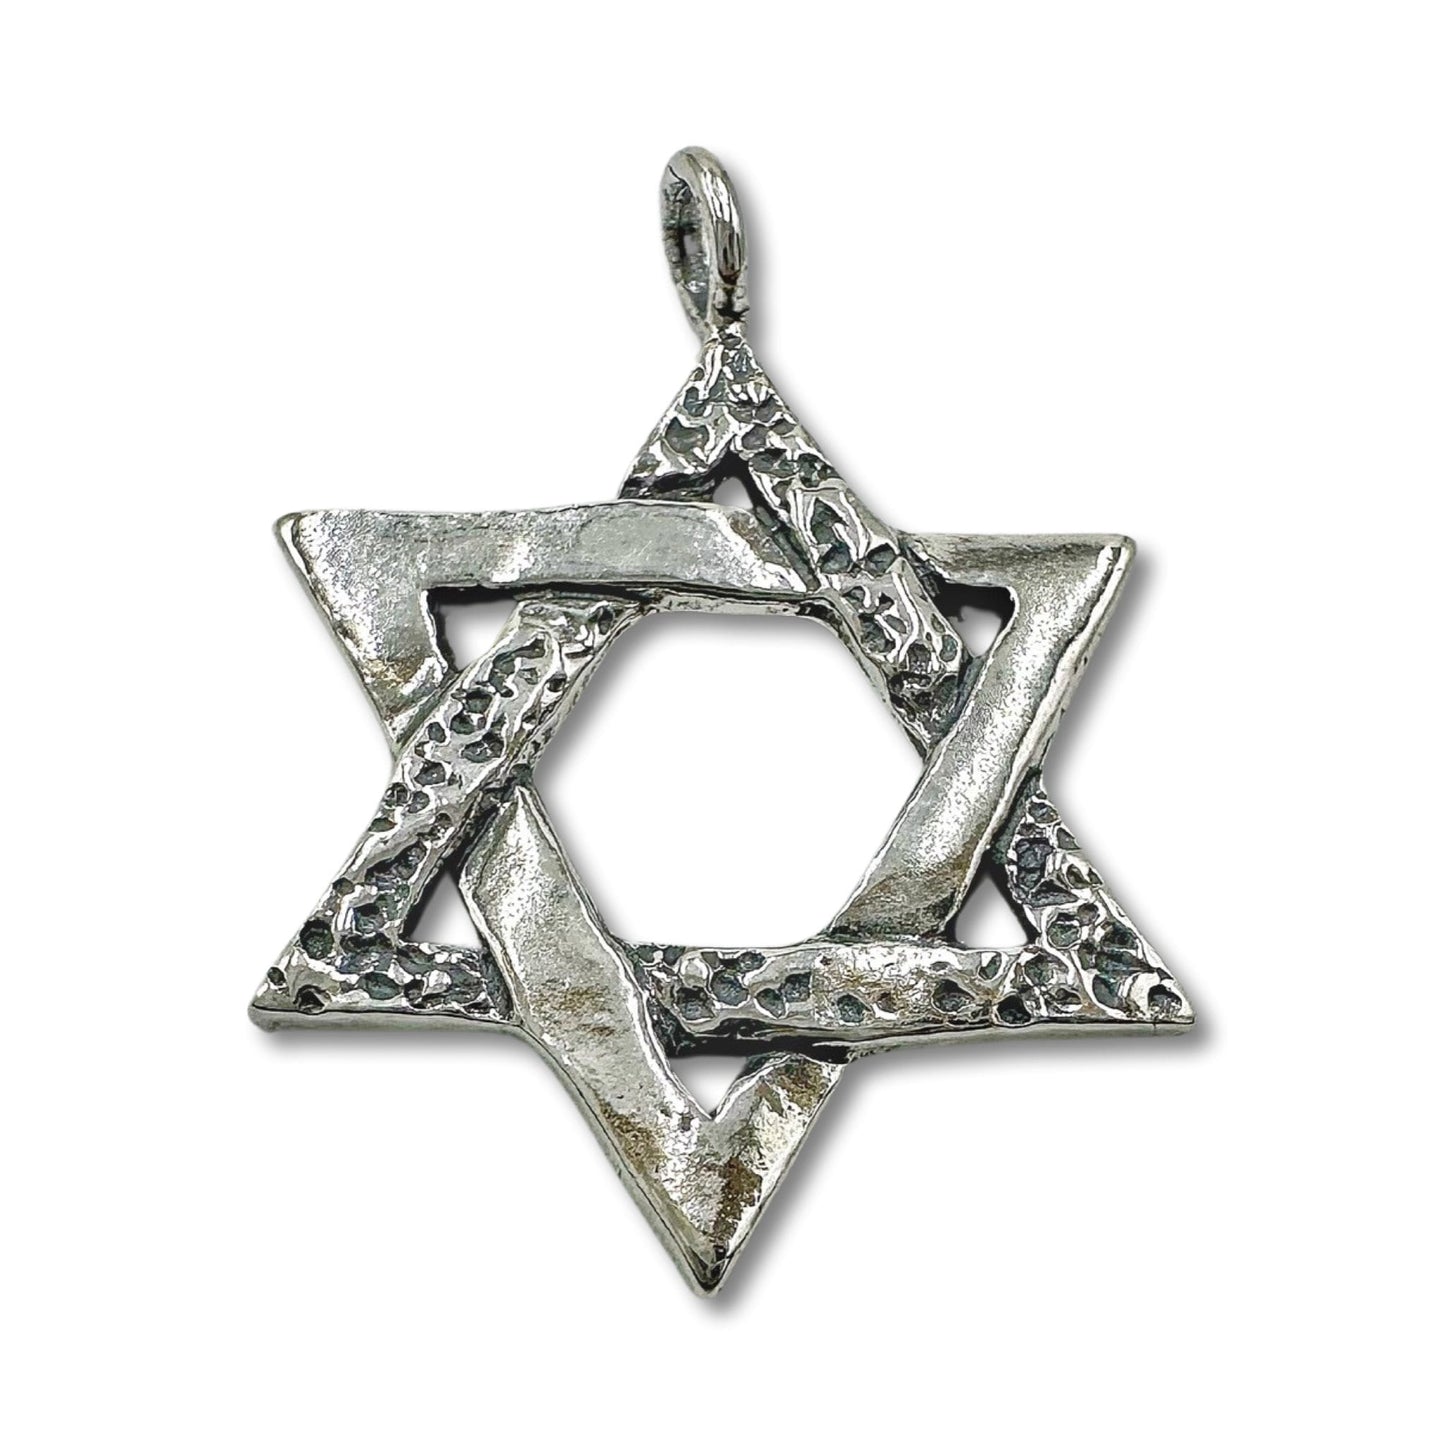 Sterling Silver Star of David Necklace/Pendant